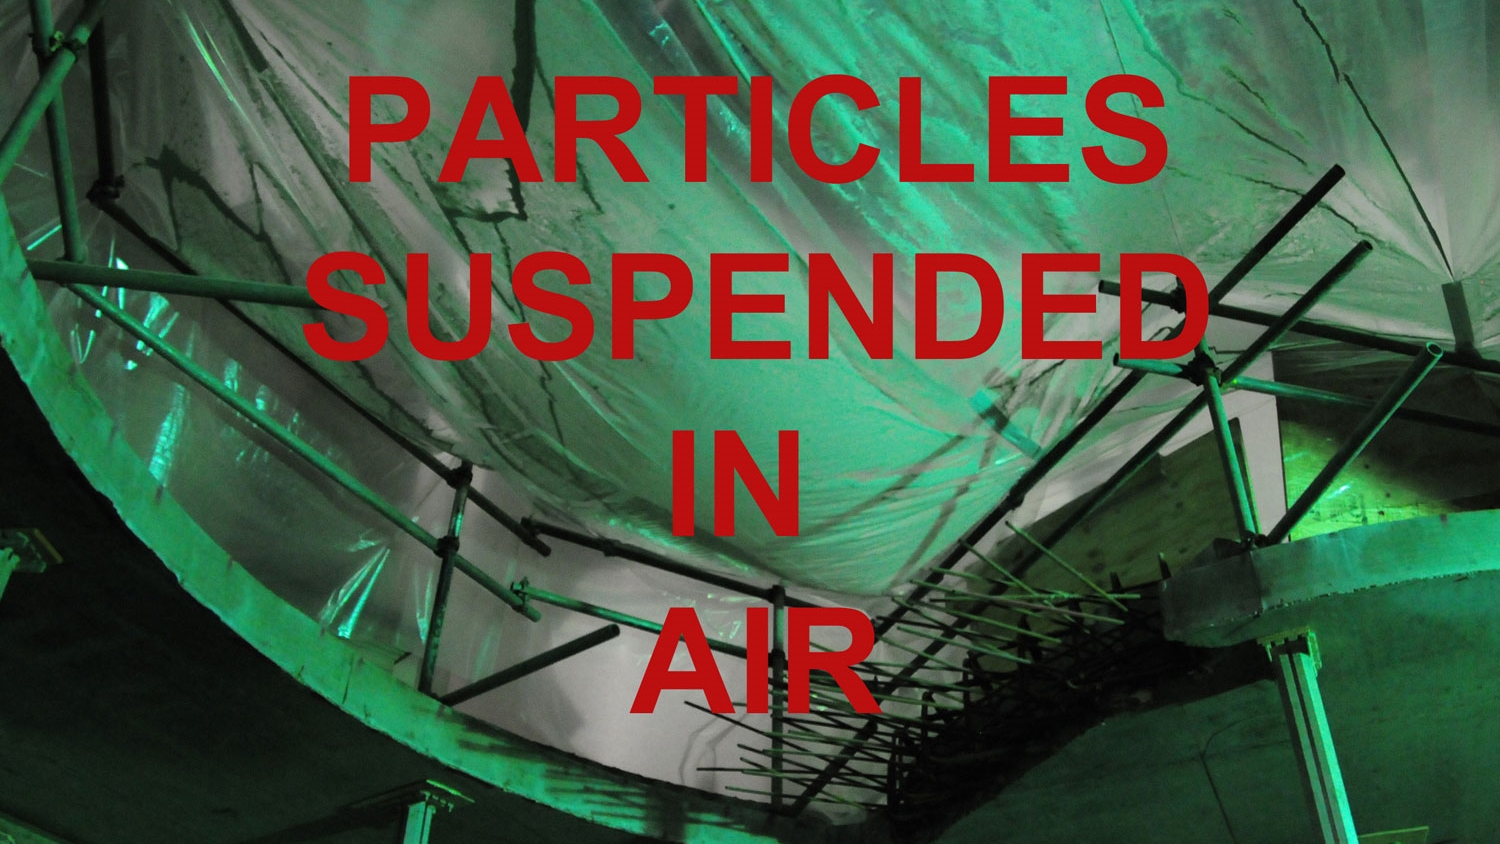 5-LVA-Tate-PARTICLES-SUSPENDED-1500w-1500w-web.jpg